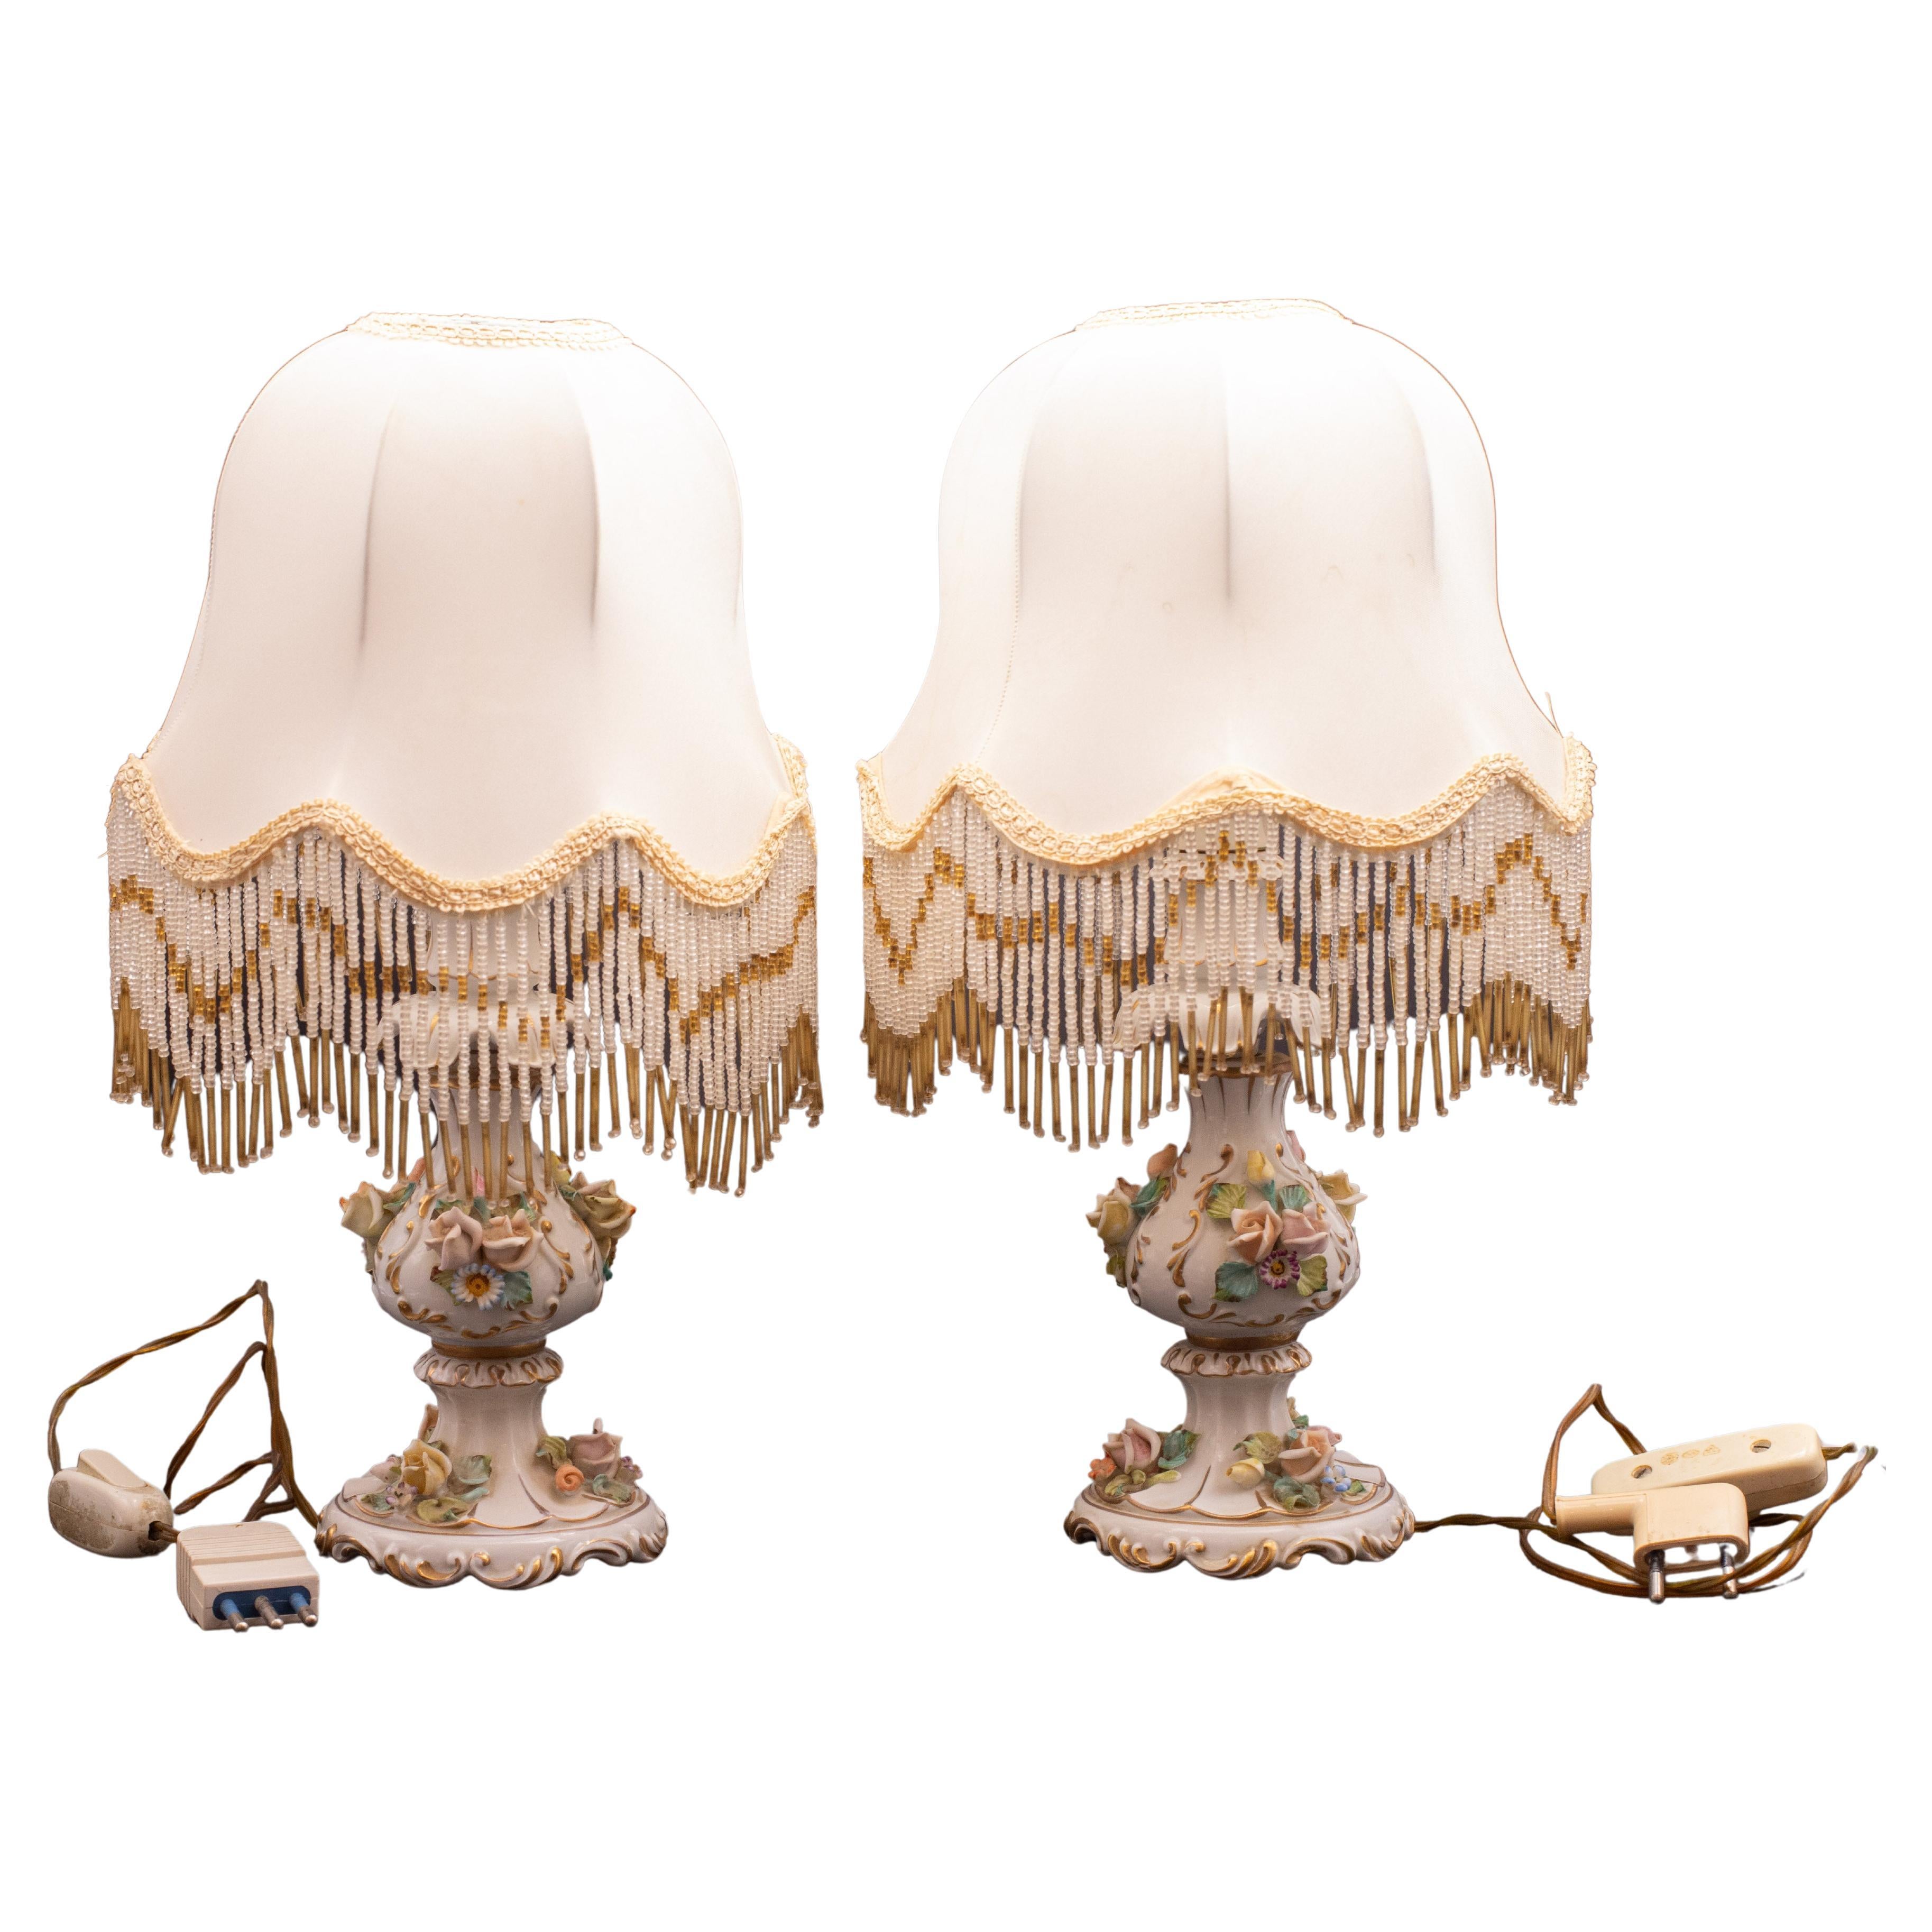 Set of 2 Midcentury Italian Modern Capodimonte Porcelain Floral Table Lamps